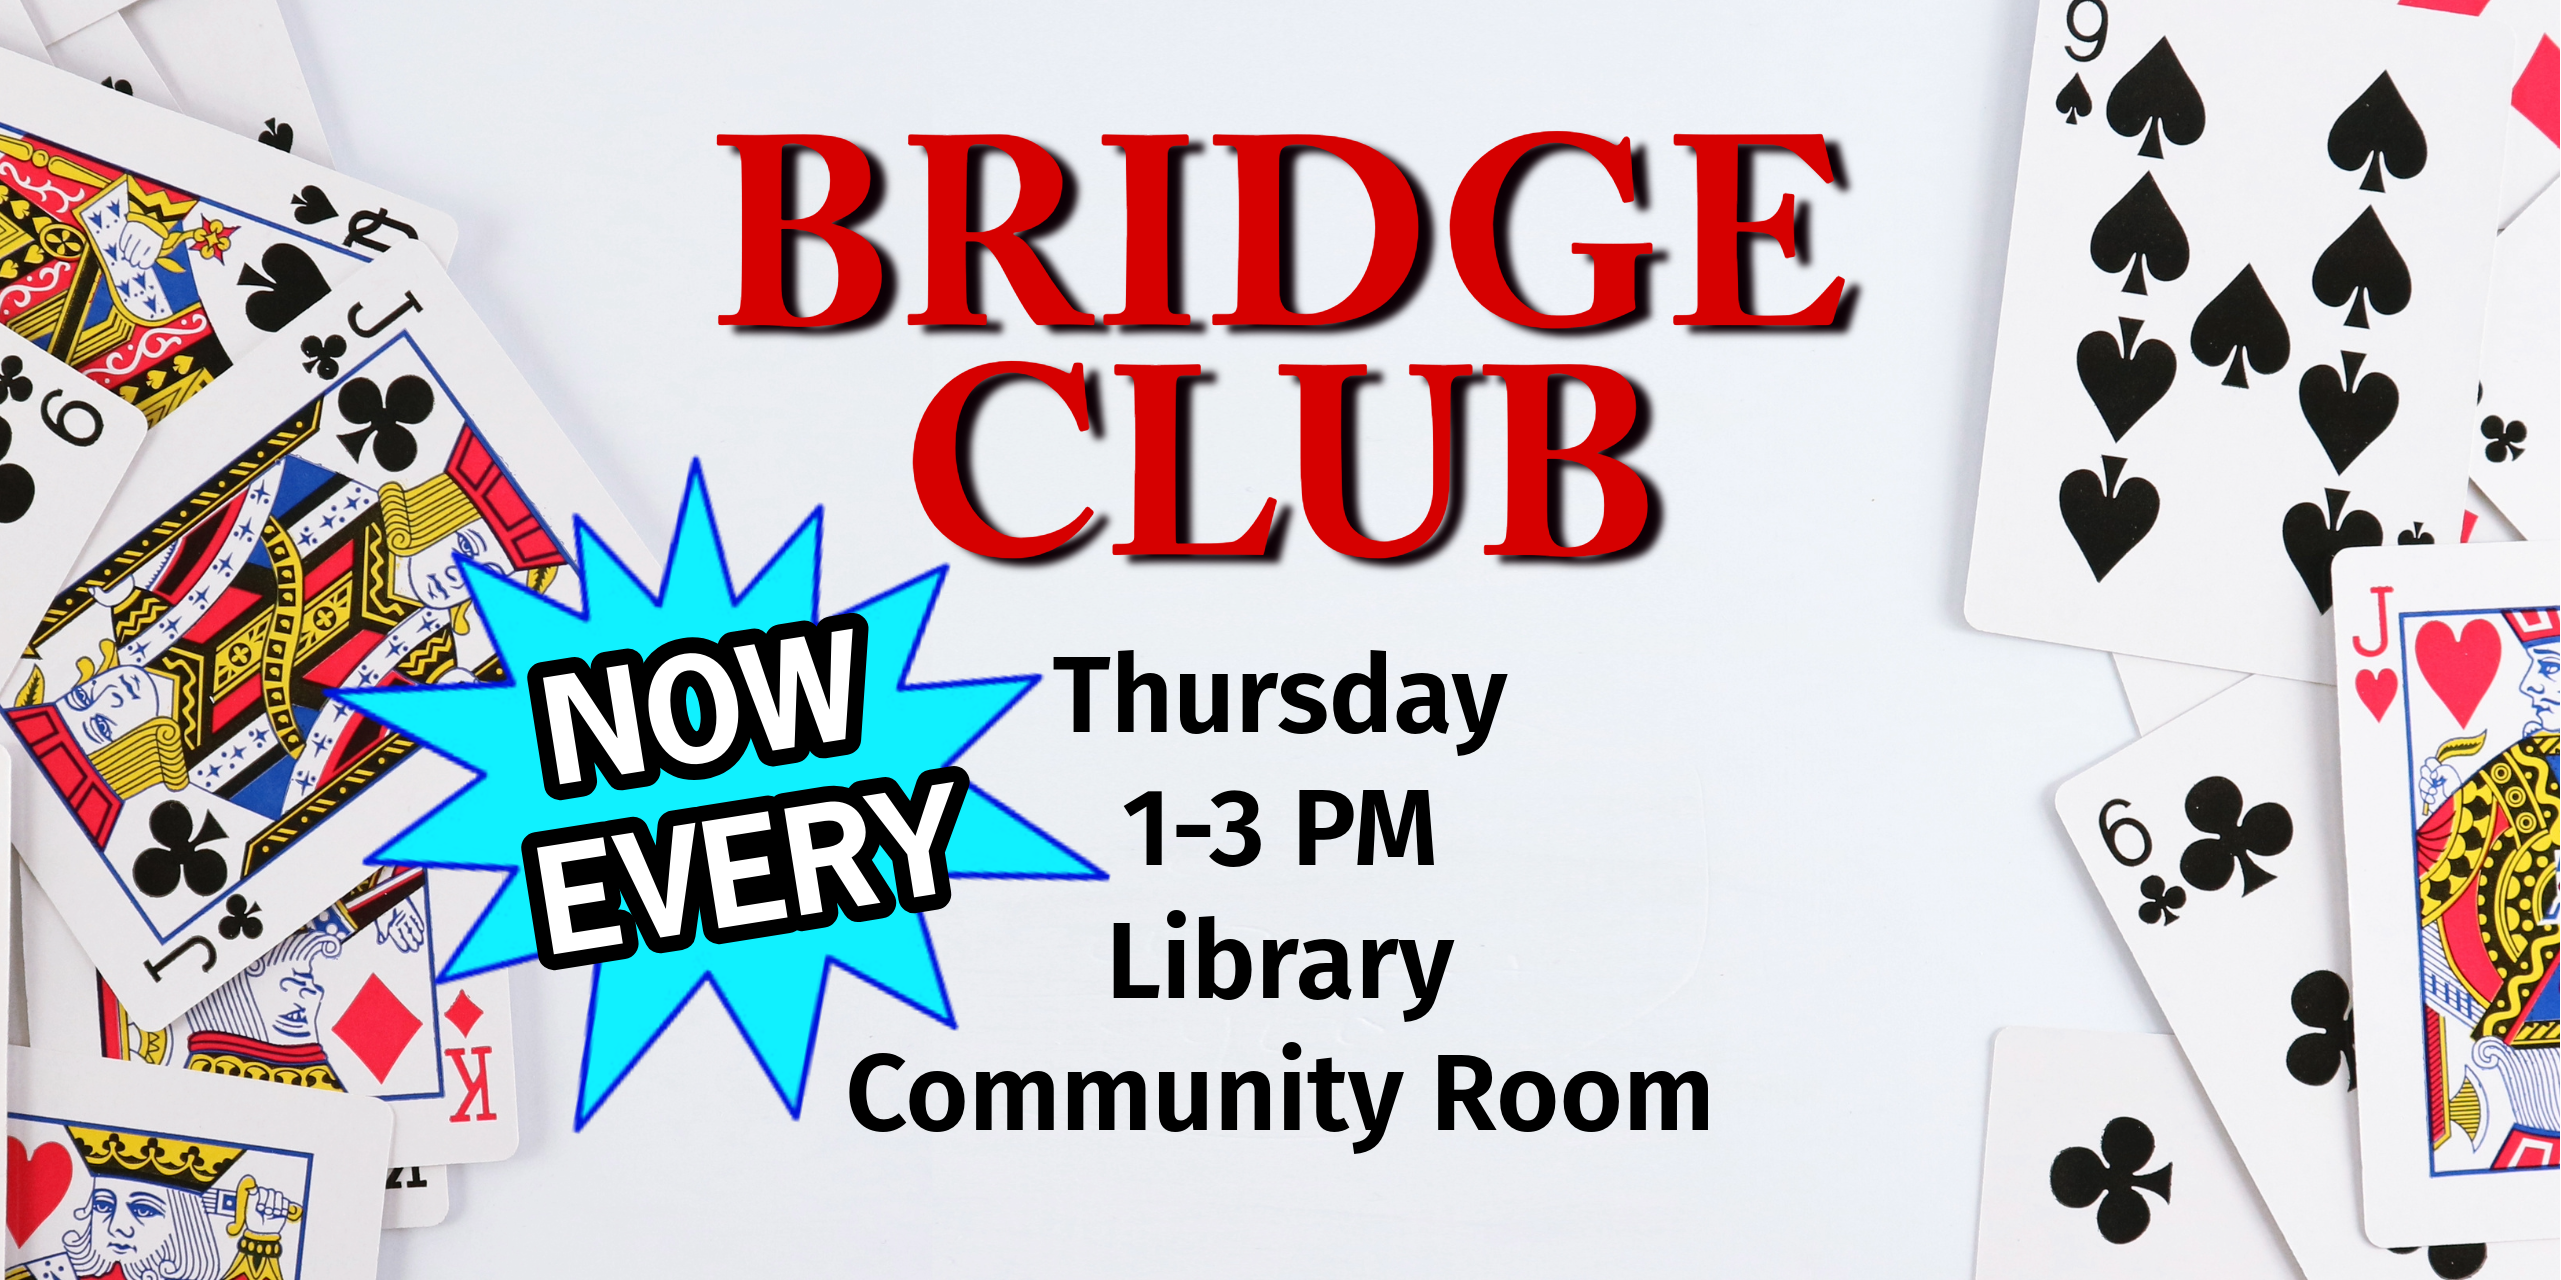 Bridge Club meets every Thursday, 1-3 PM, in the Library Community Room.  All levels of play are welcome; no registration is required.